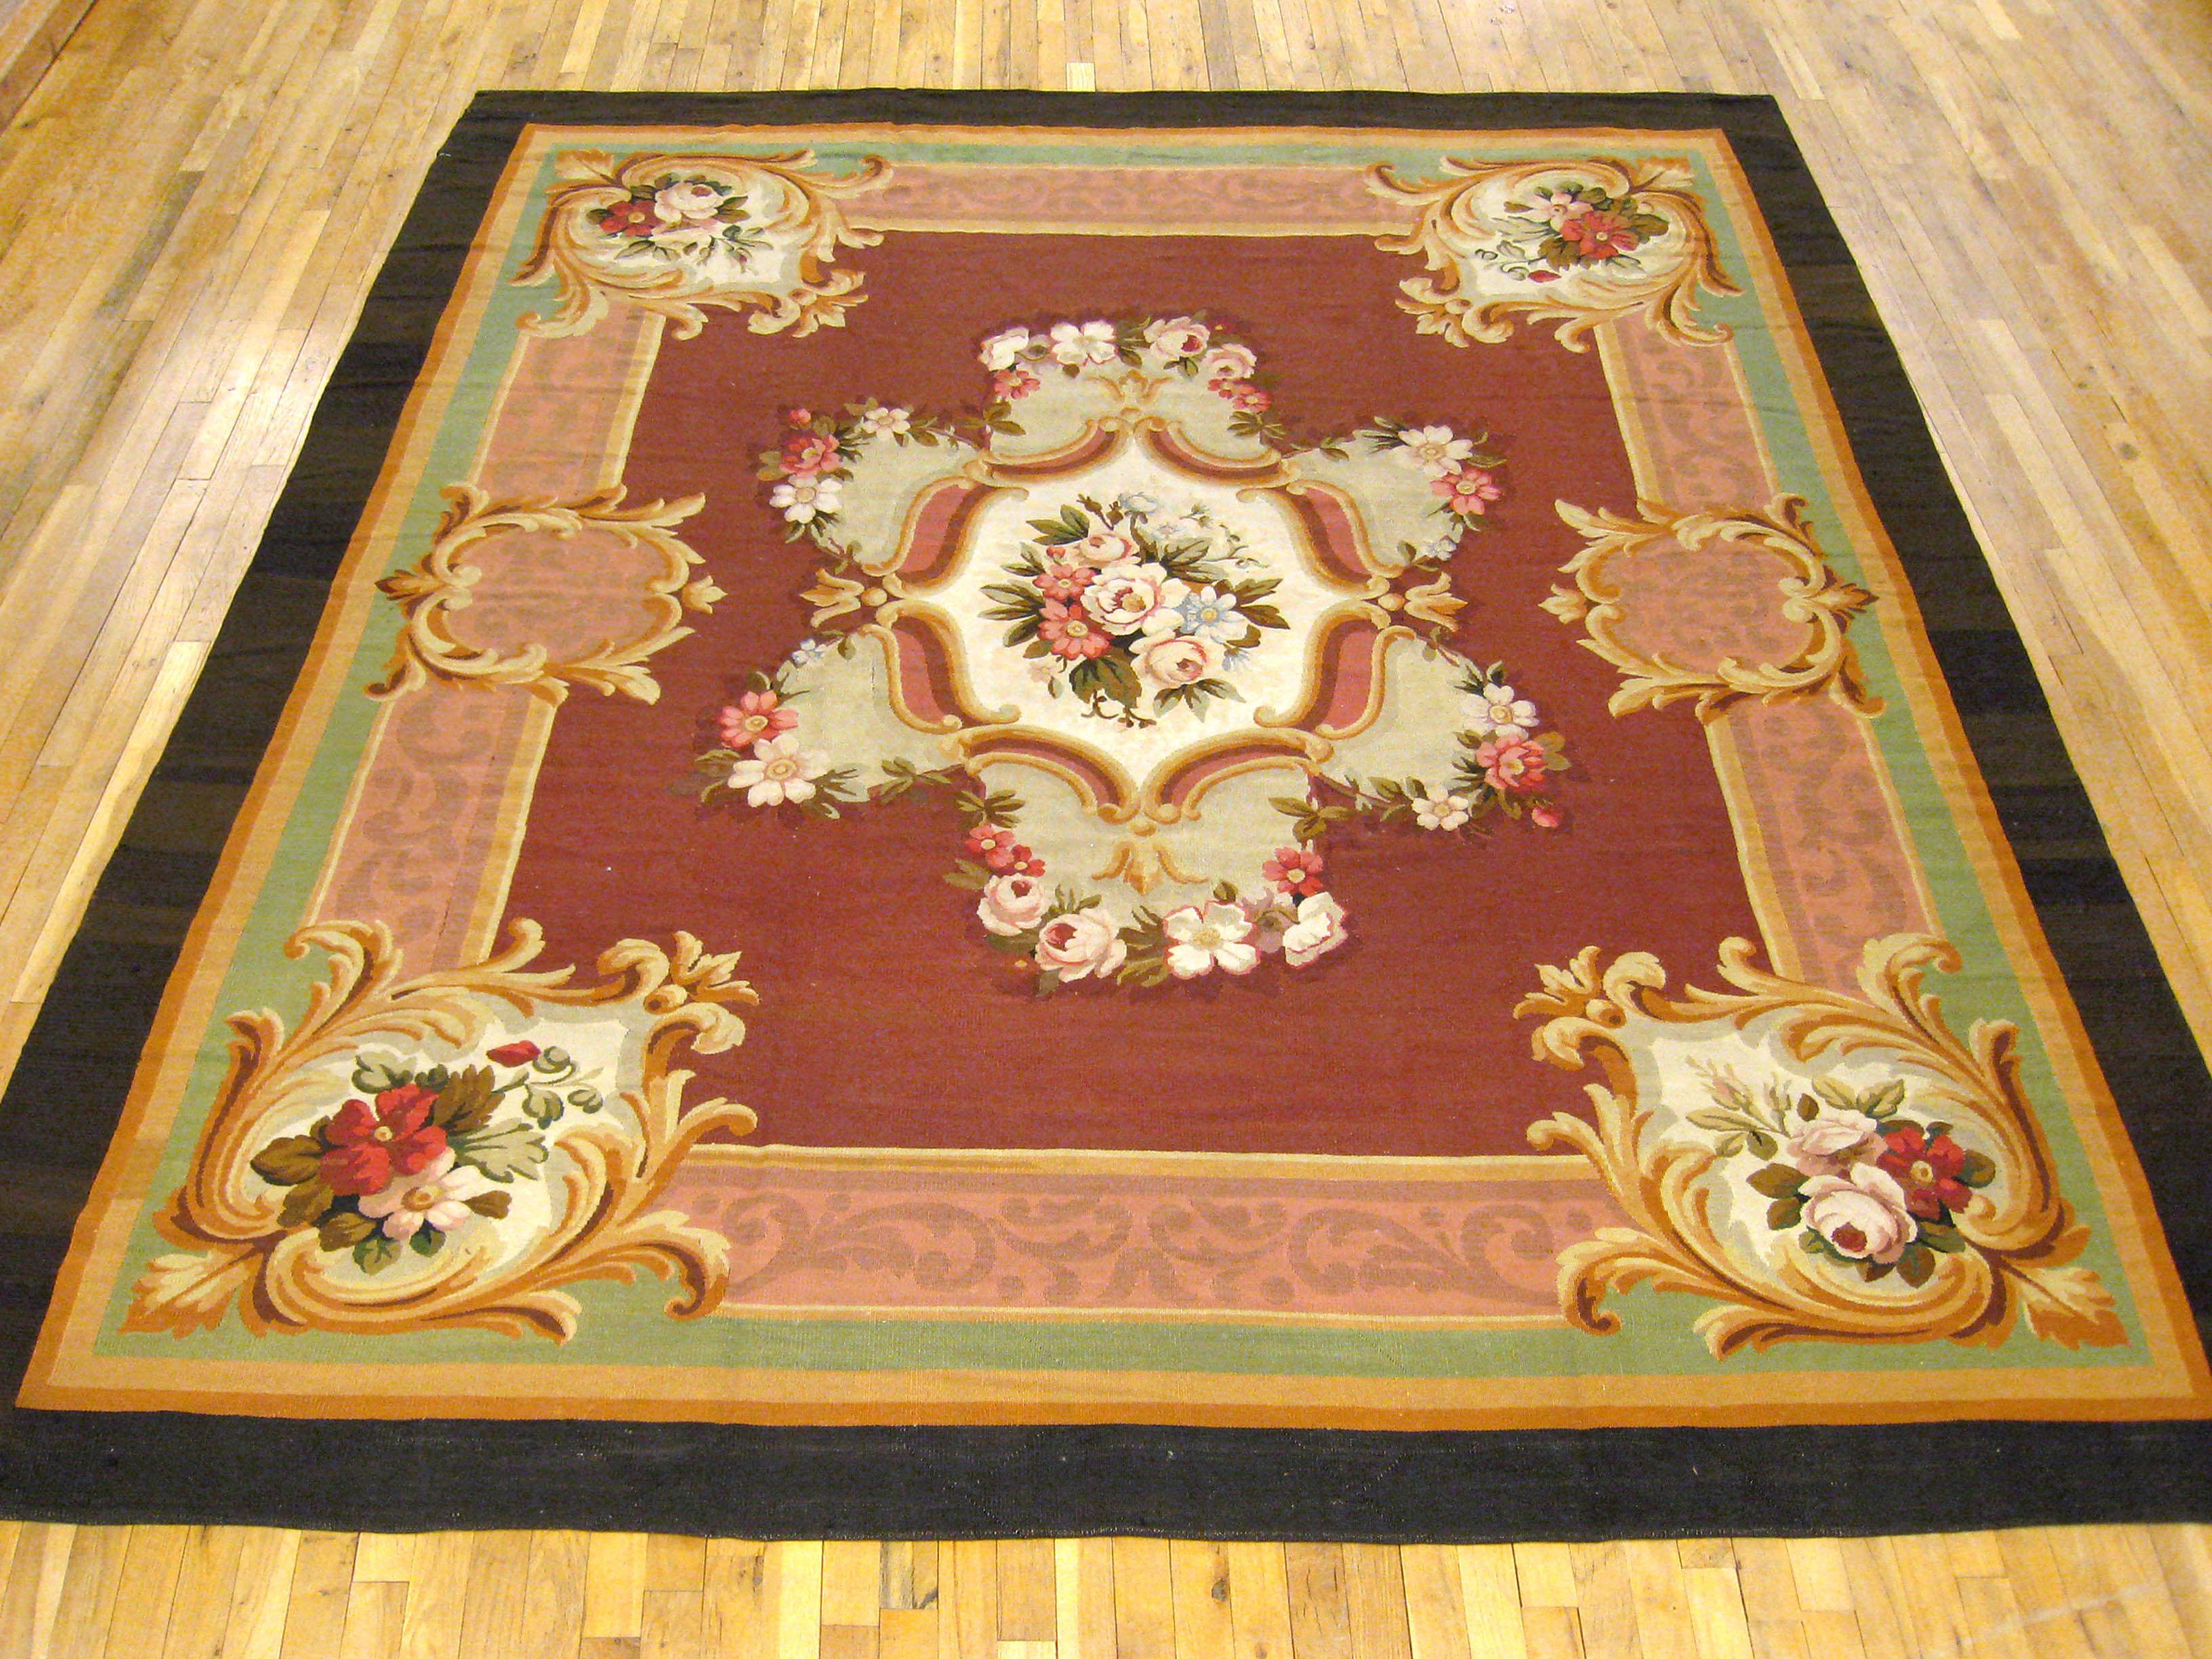 Antique French Aubusson rug, Room size, circa 1880

A one-of-a-kind antique French Aubusson Carpet, hand-knotted with soft wool pile. This lovely hand-knotted wool rug features a central medallion on the red primary field, with a delicate black